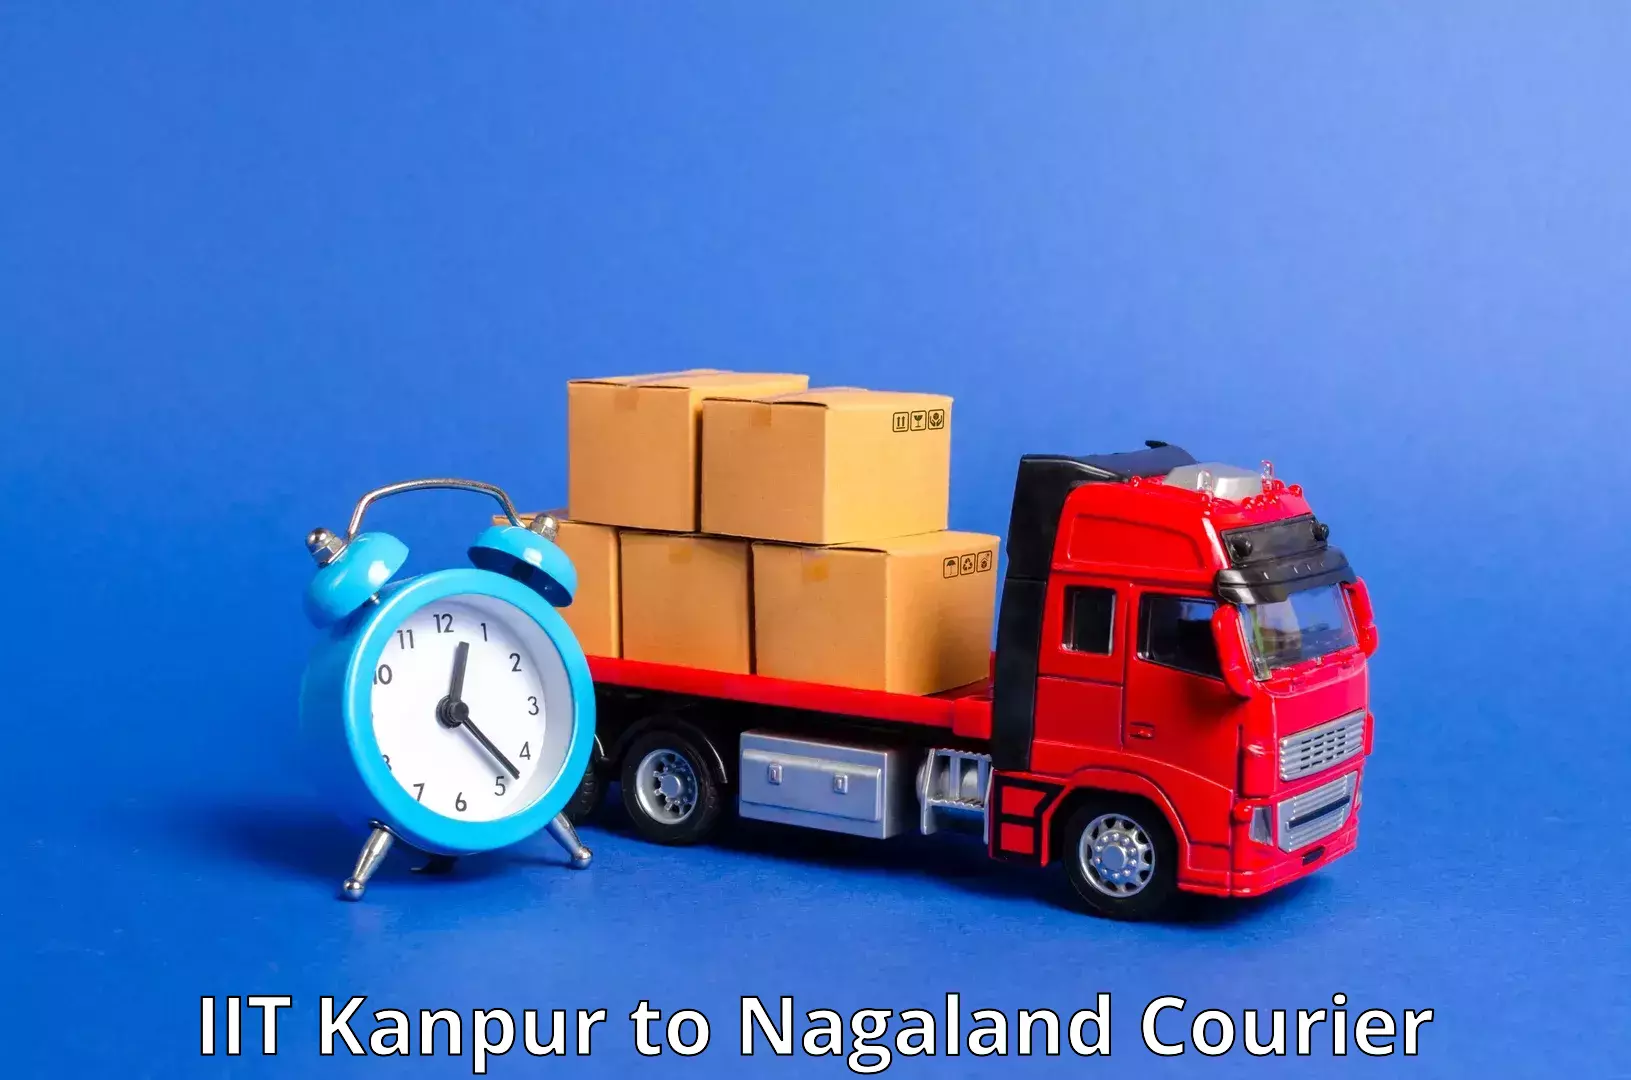 Express delivery solutions IIT Kanpur to Dimapur